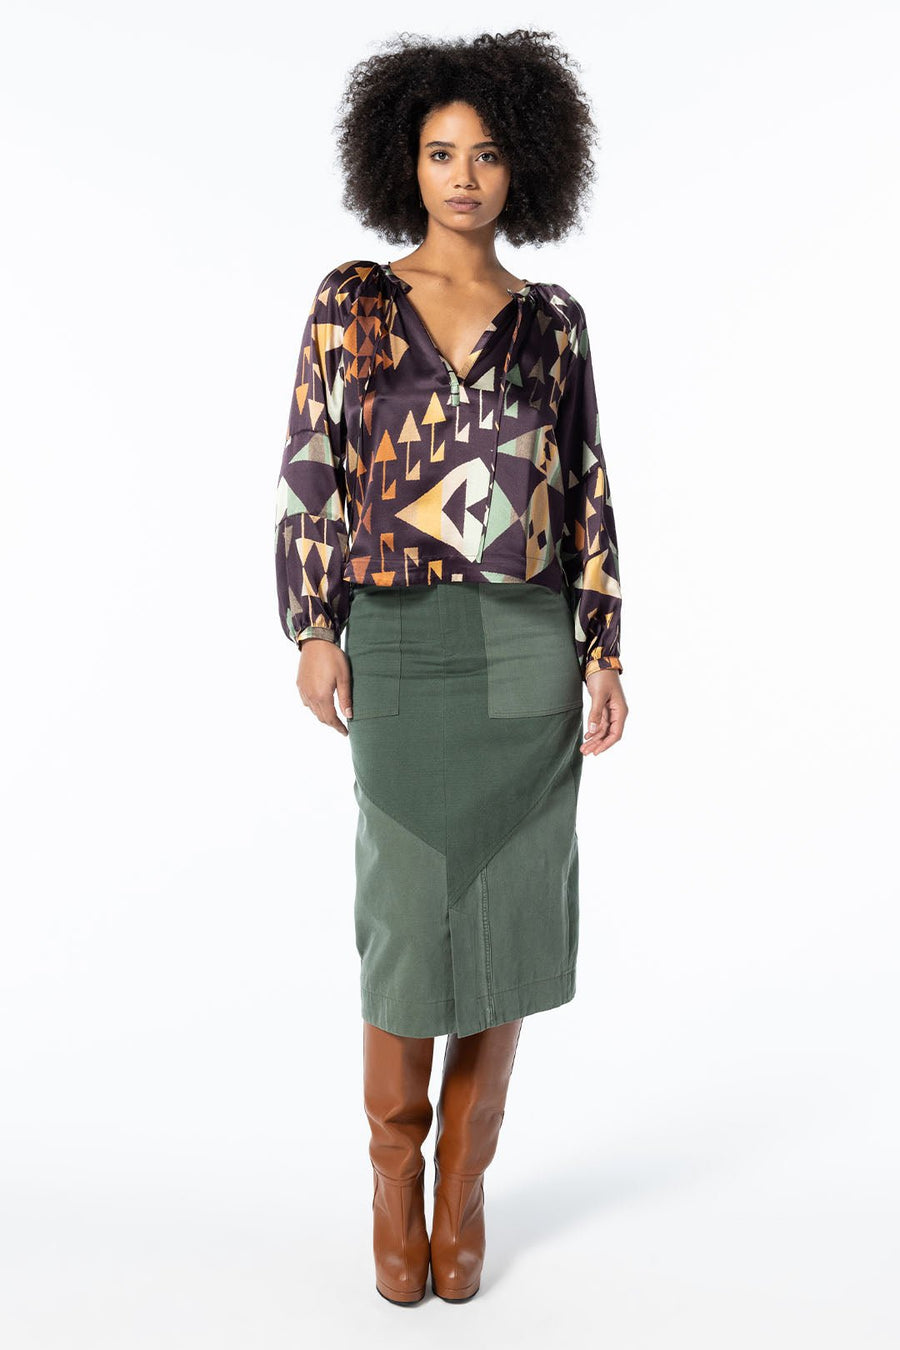 LOVE NOT WAR ARMY SKIRT, ARMY - Burning Torch Online Boutique